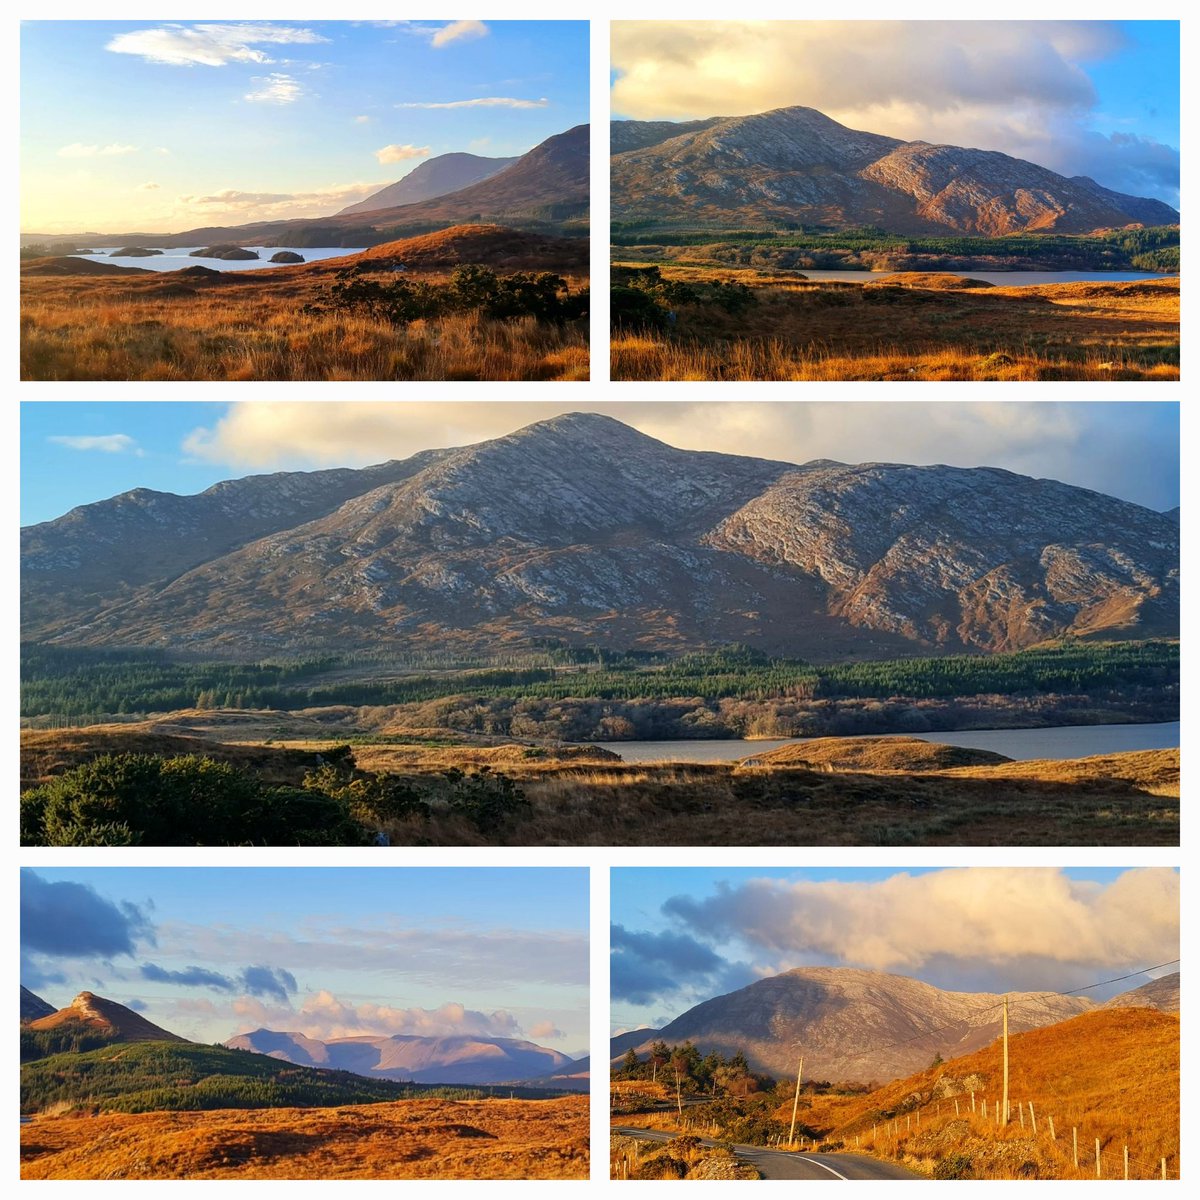 What a day... pulled in off the road to take these pics as the colours were so vivid... #Connemara #NaturePhotography  #NatureBeauty #GalwayGirl #WestOfIreland